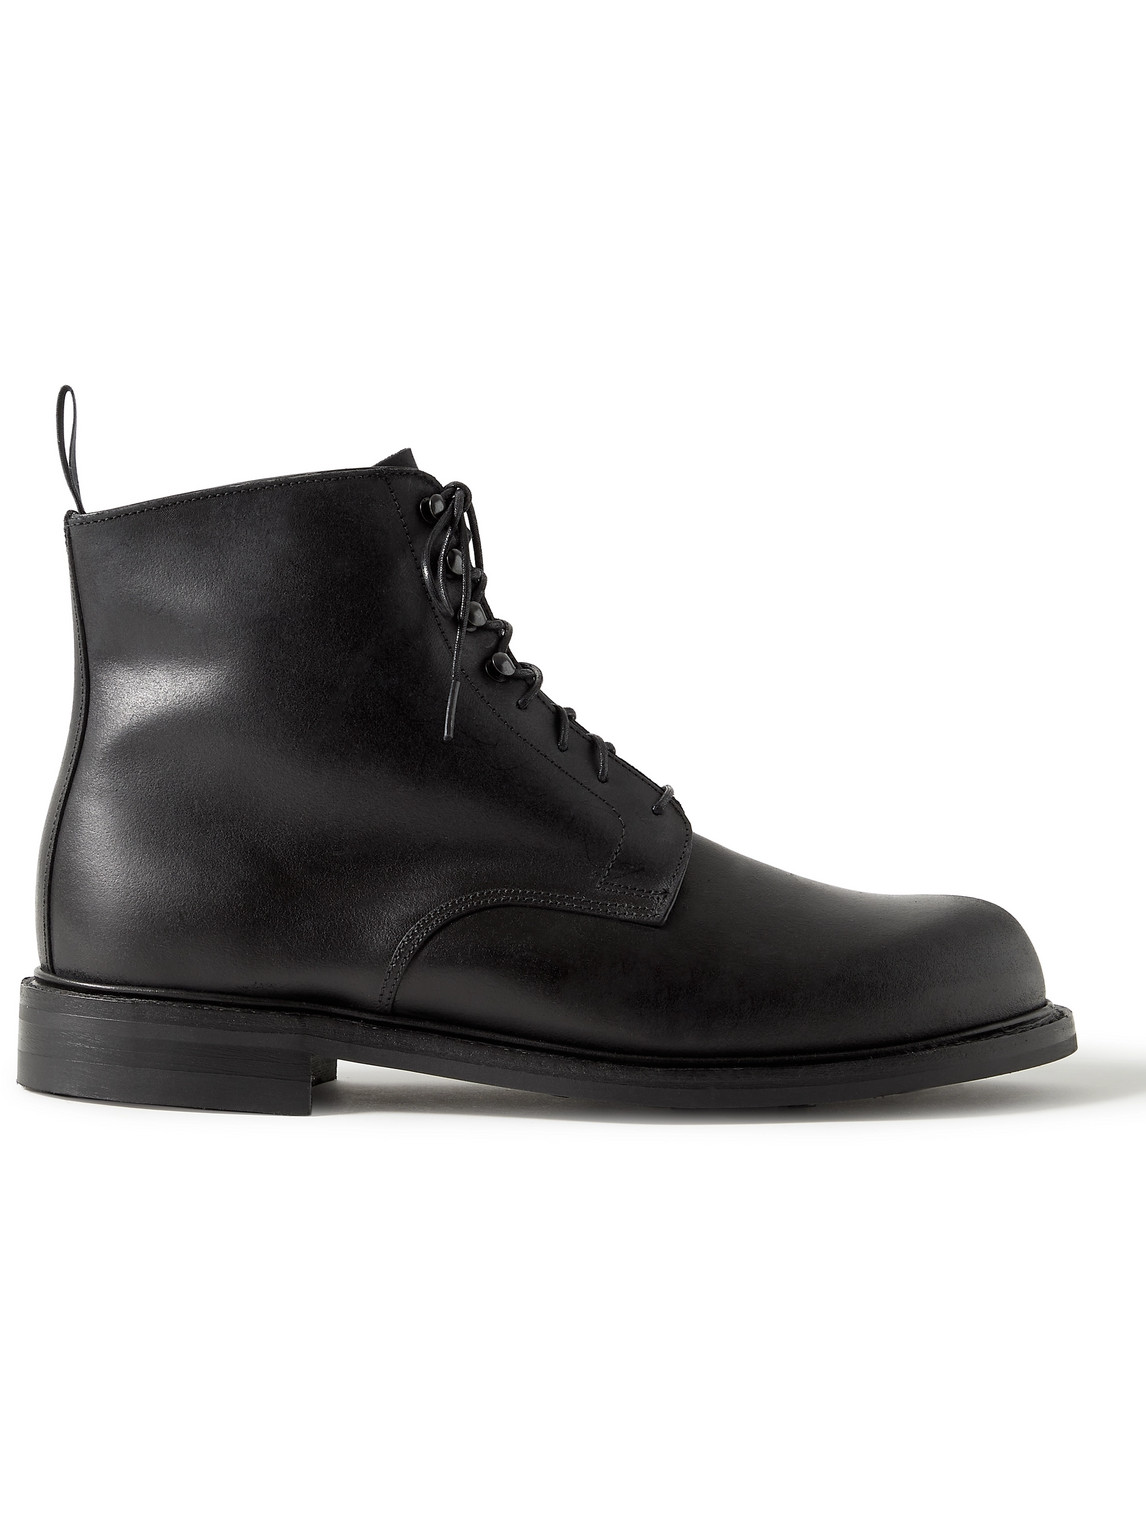 George Cleverley Taron 2 Leather Boots In Black